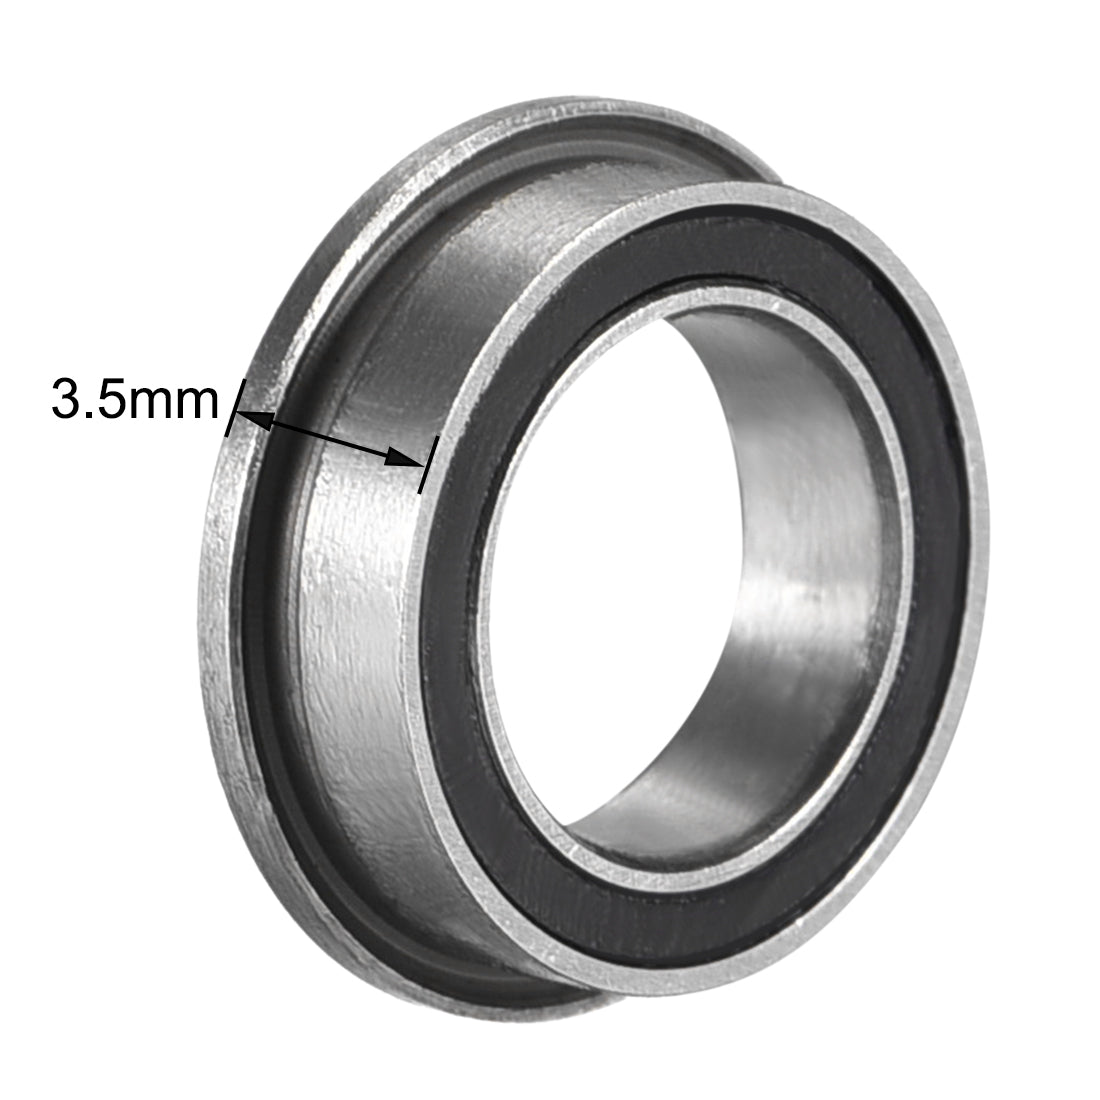 uxcell Uxcell MF128-2RS Flange Ball Bearing 8x12x3.5mm Sealed Chrome Steel Bearings 5pcs